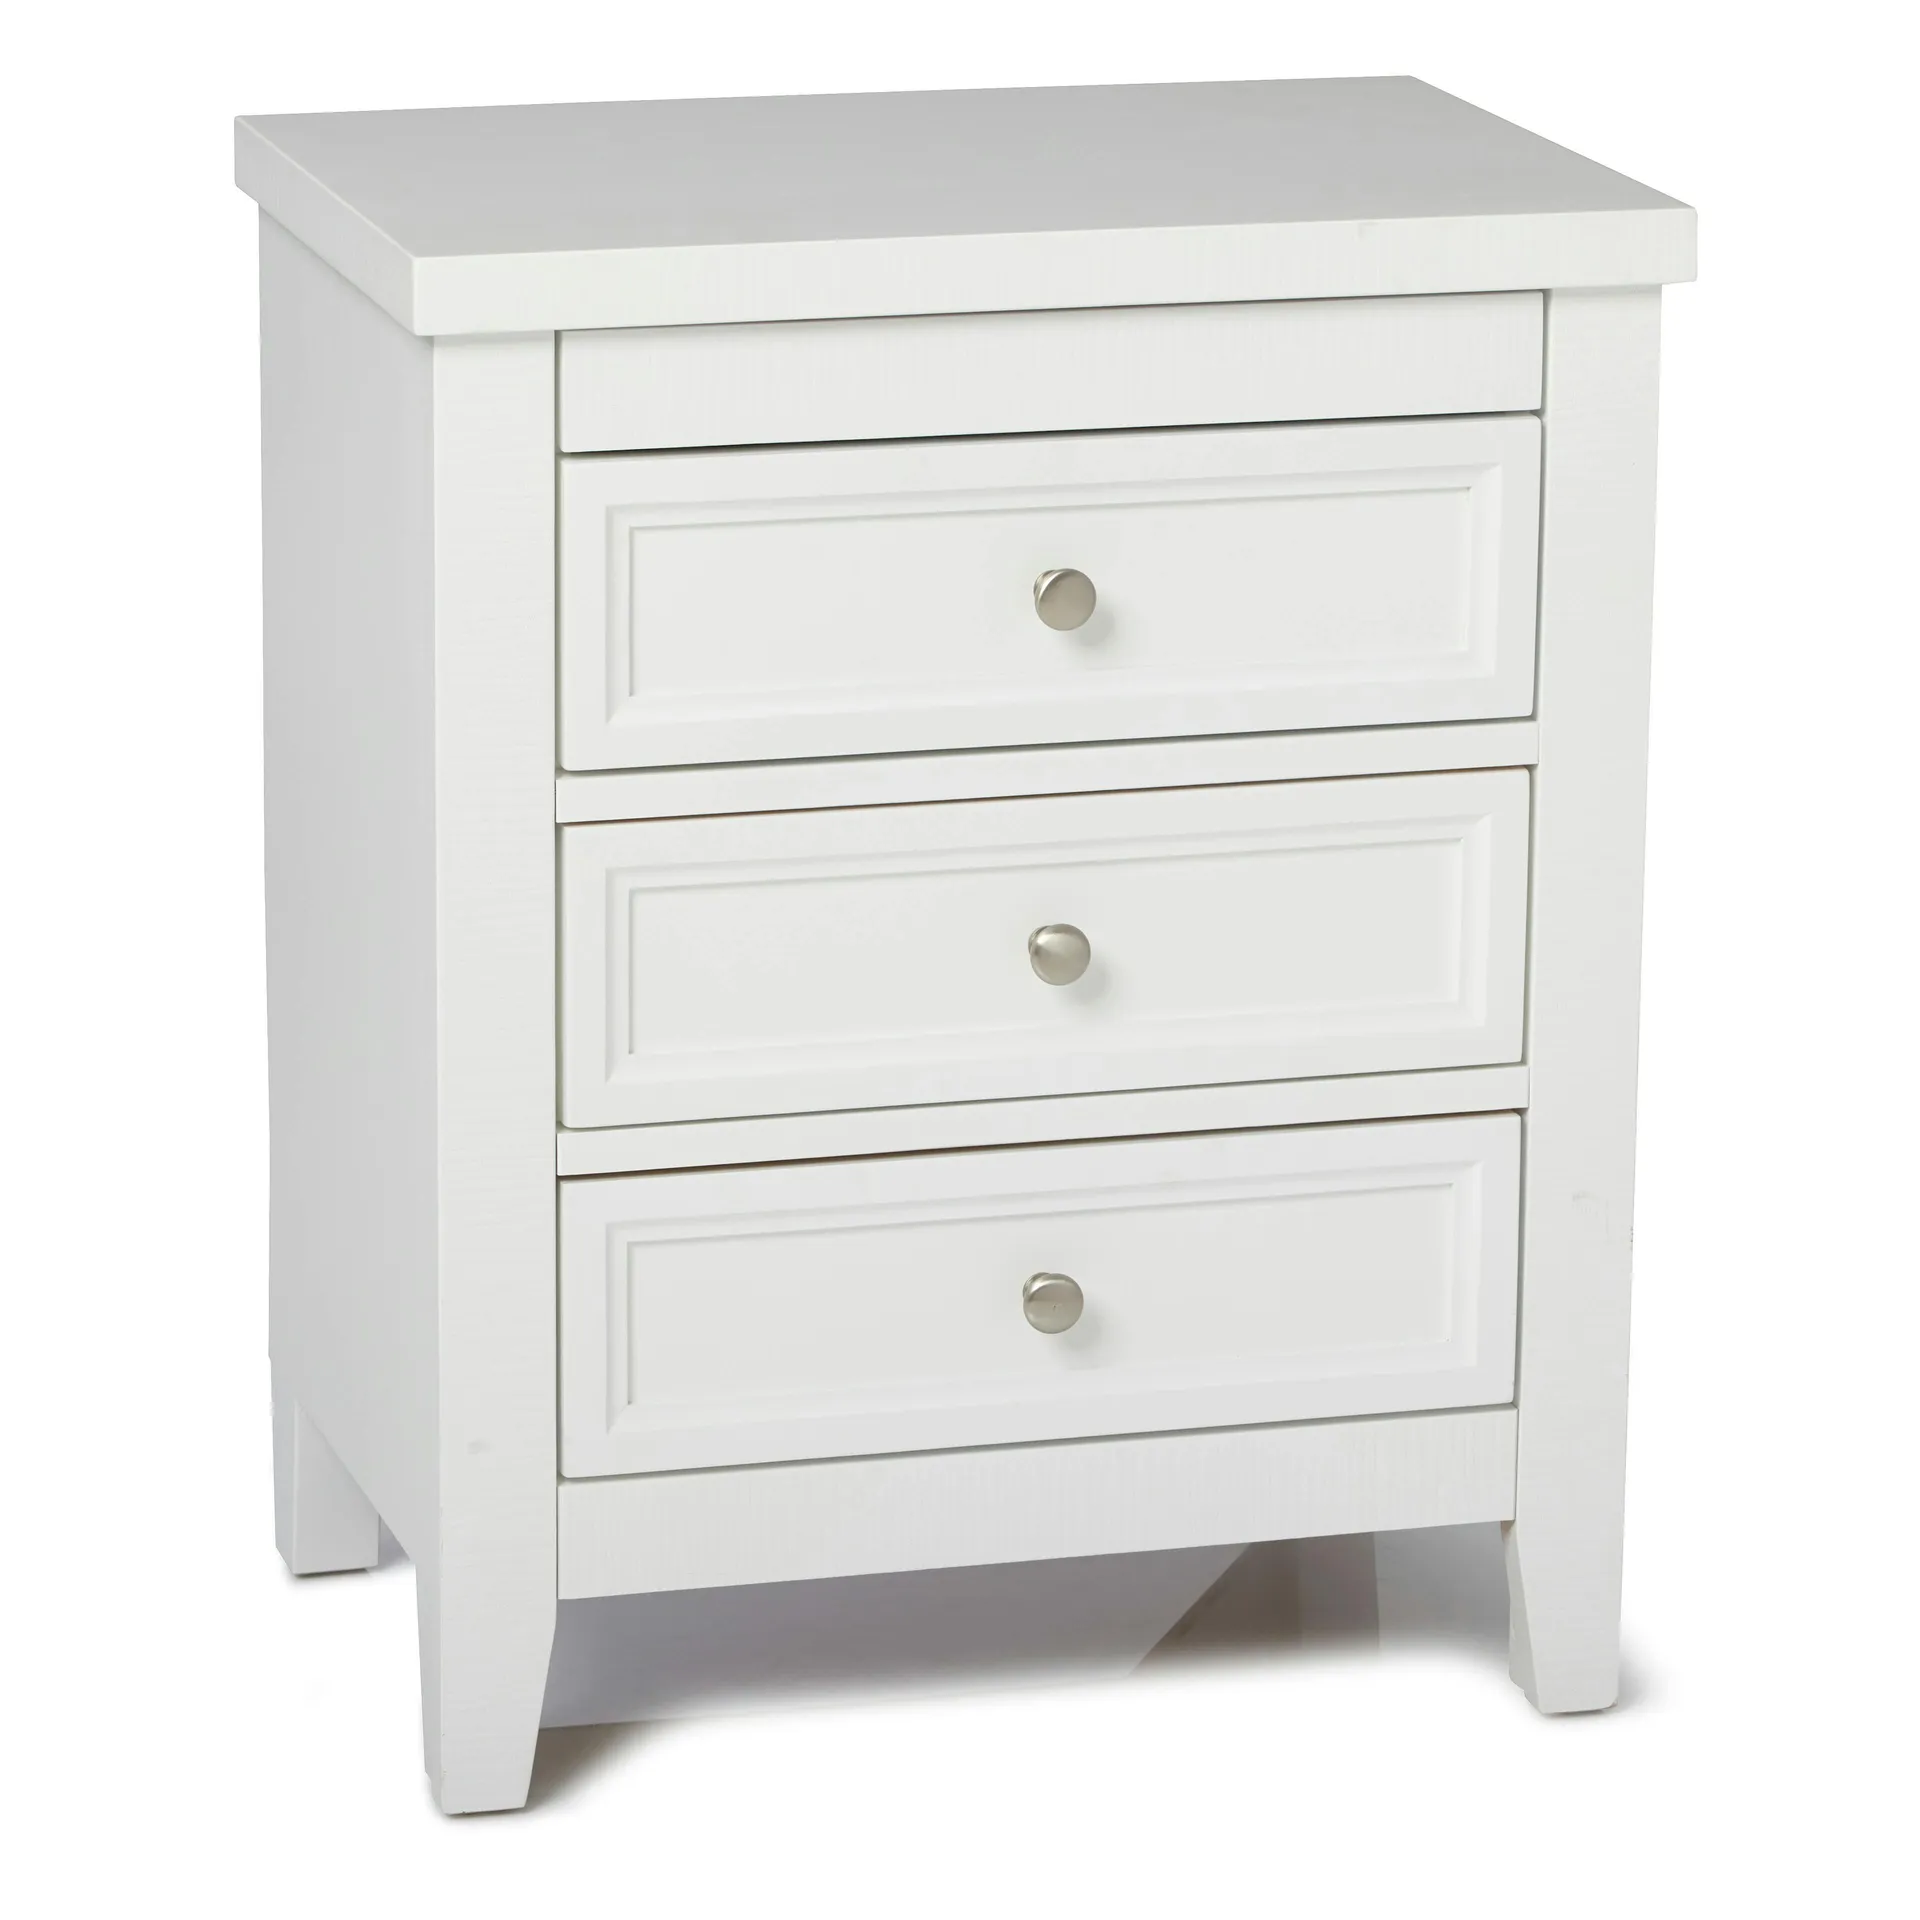 Dahlia Bedside Table (3 Drawer), White